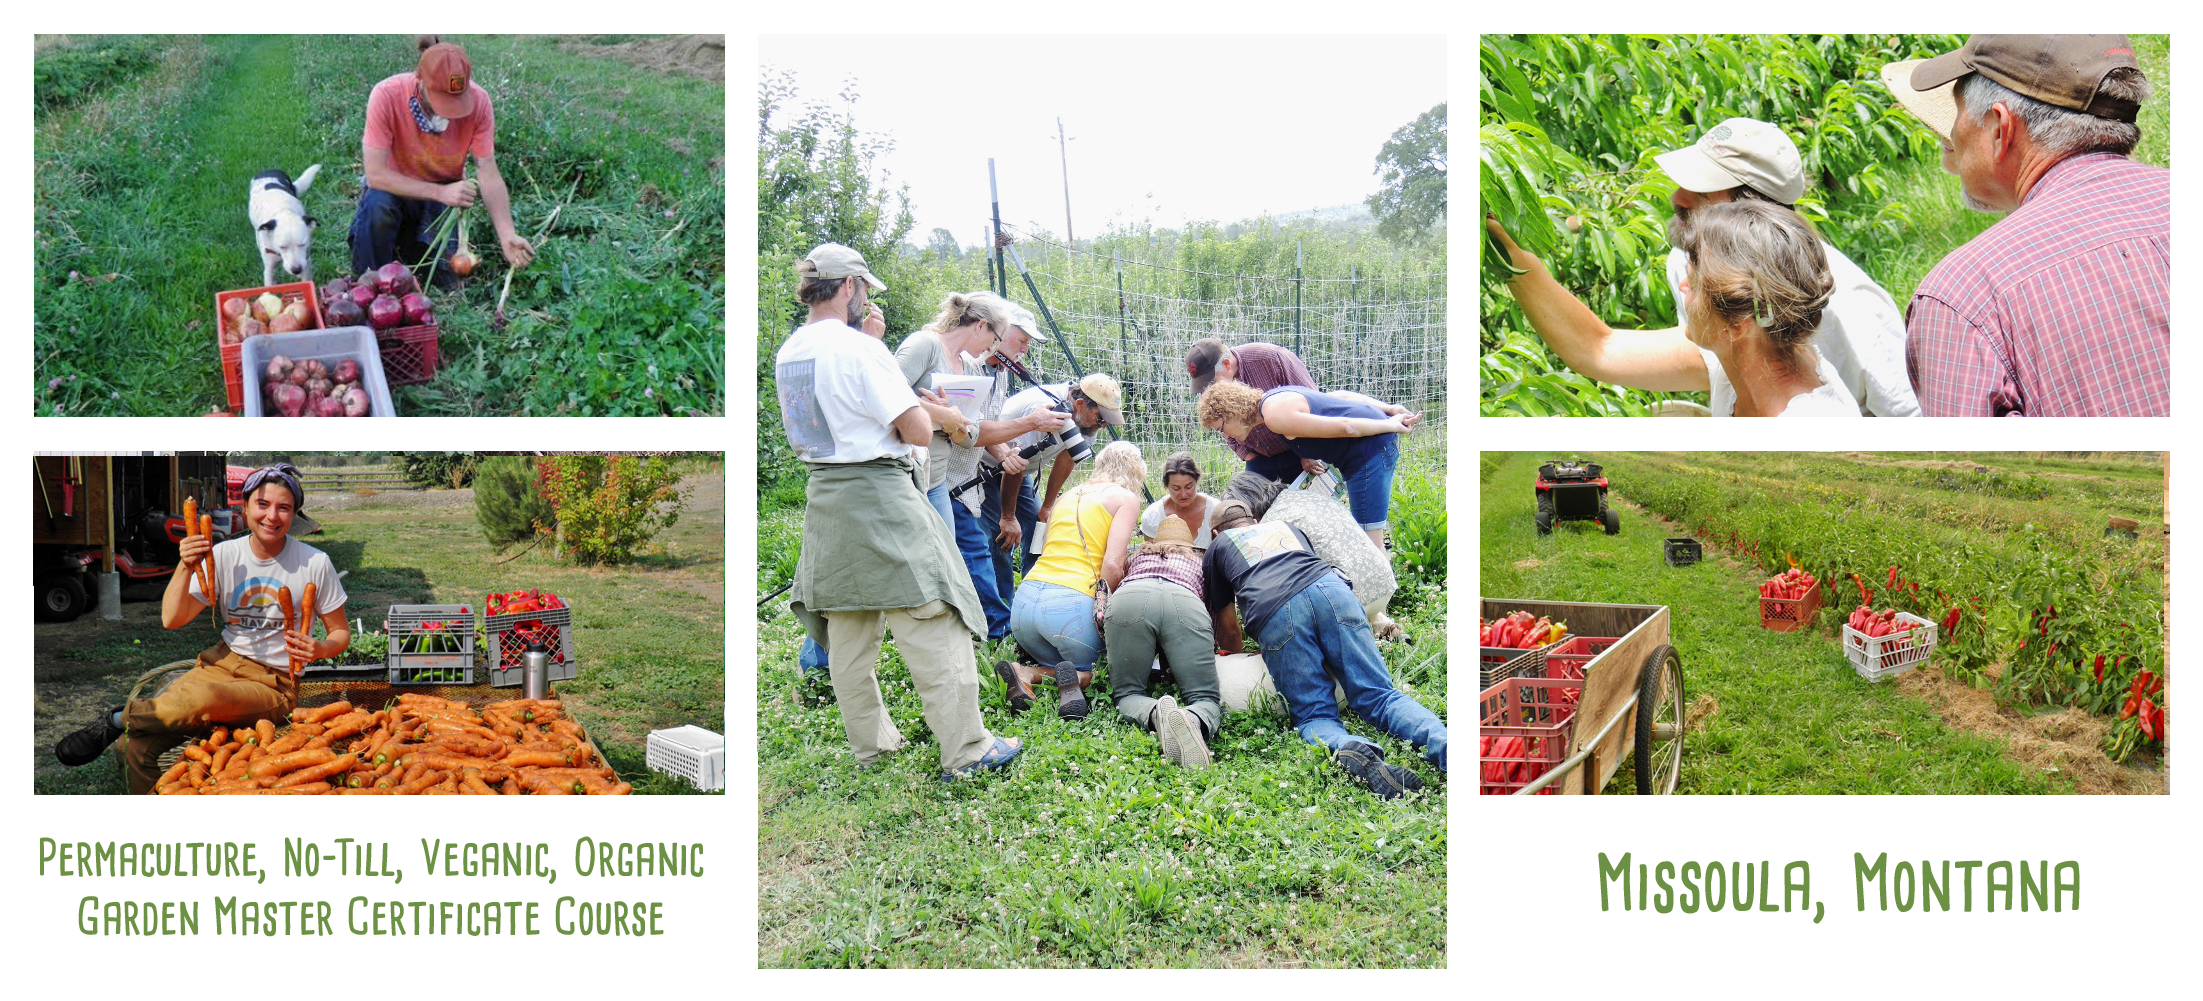 Permaculture Garden master course in Missoula Montana